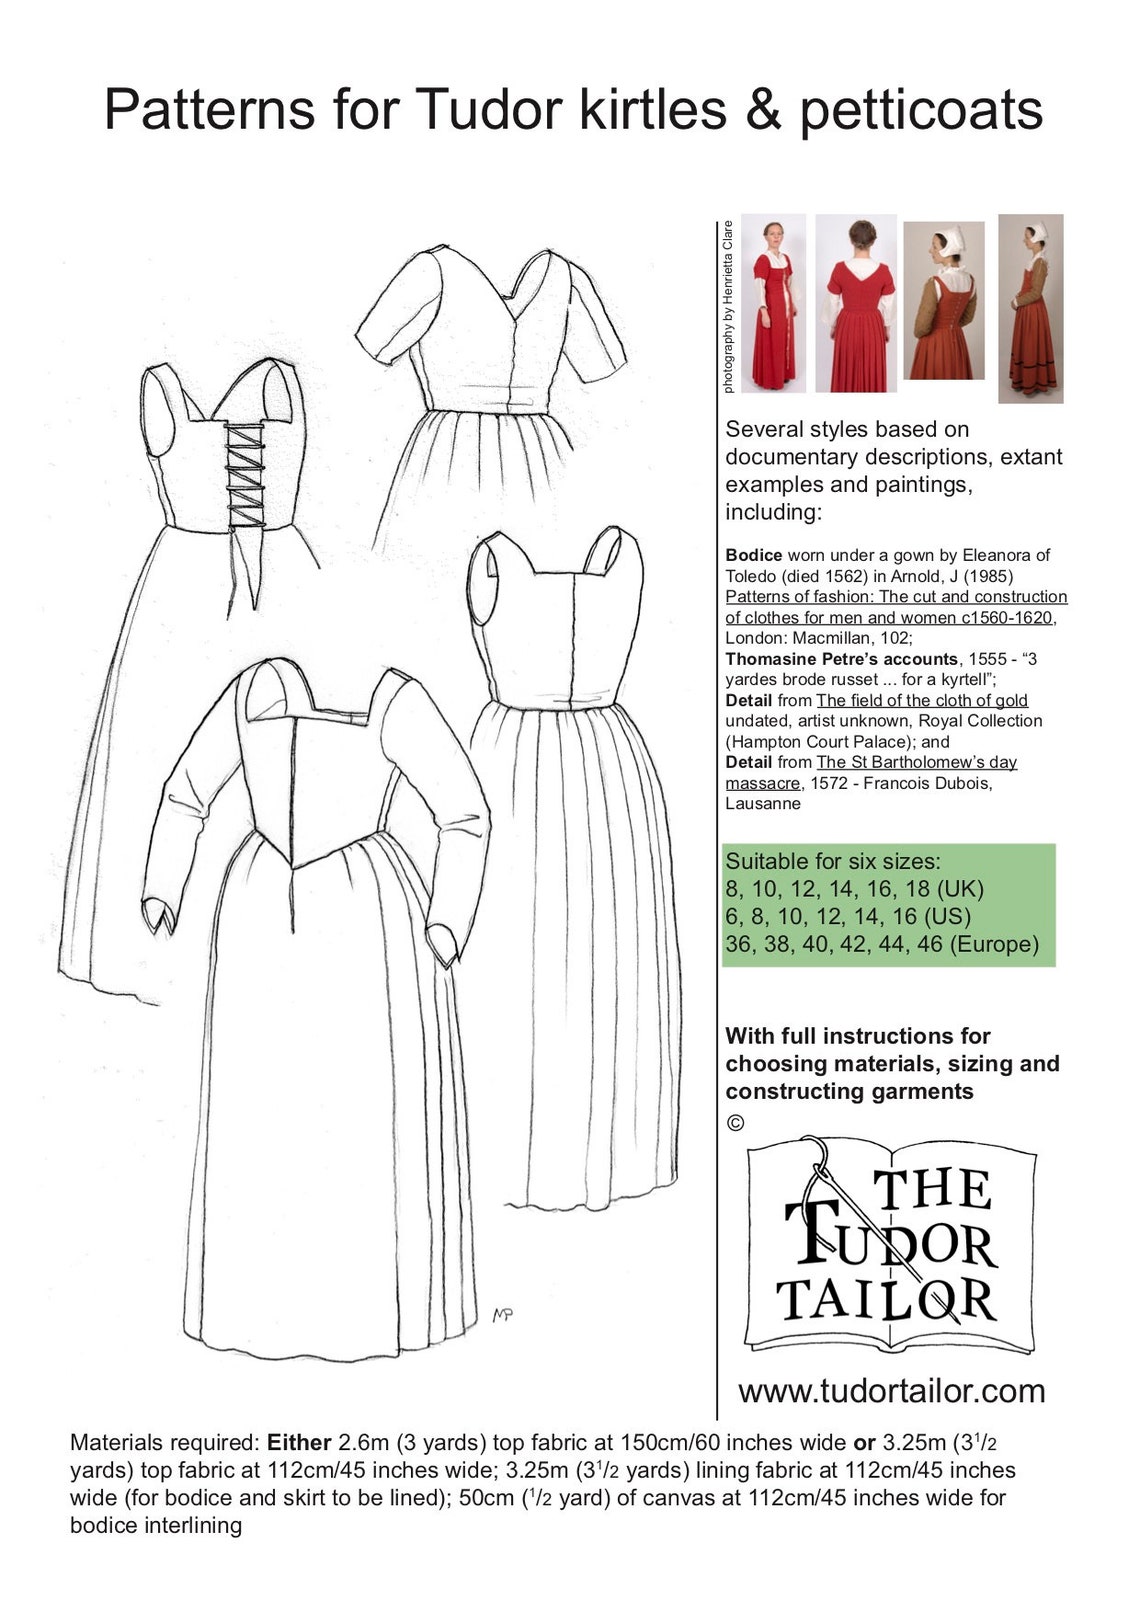 Pattern for Women's Tudor Kirtles and Petticoats - Etsy